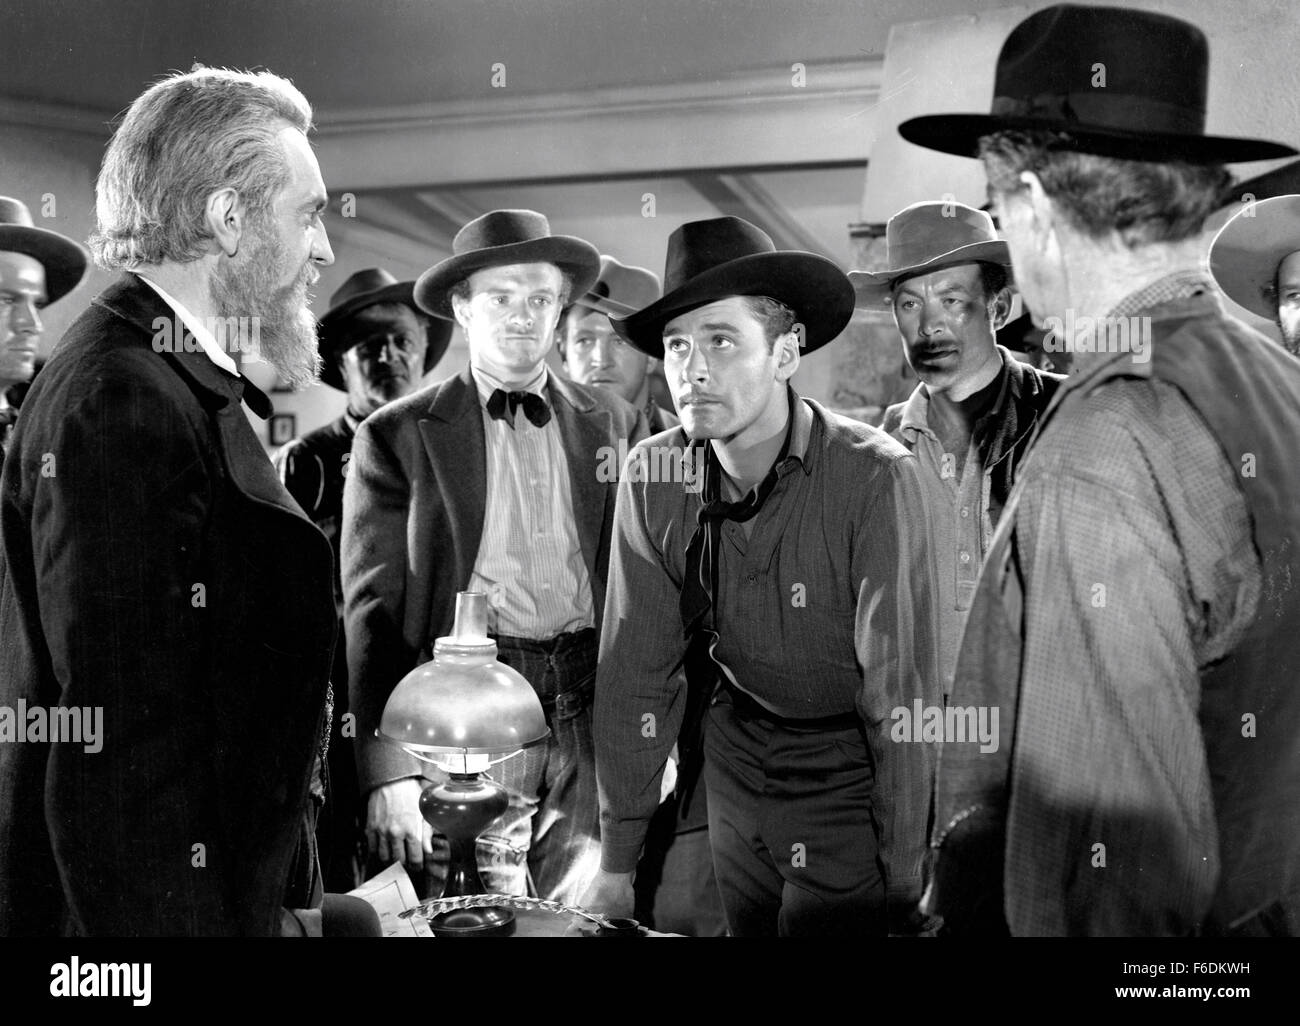 RELEASE DATE: April 8, 1939. MOVIE TITLE: Dodge City. STUDIO: Warner Bros. Pictures. PLOT: A wide-open cattle town run by Jeff Surrett. Even going on a children's Sunday outing is not a safe thing to do. What the place needs is a fearless honest Marshal. A guy like Wade Hatton, who helped bring the railroad in. It may not help that he fancies Abbie Irving, who won't have anything to do with him since he had to shoot her brother. PICTURED: ERROL FLYNN as Wade Hatton. Stock Photo